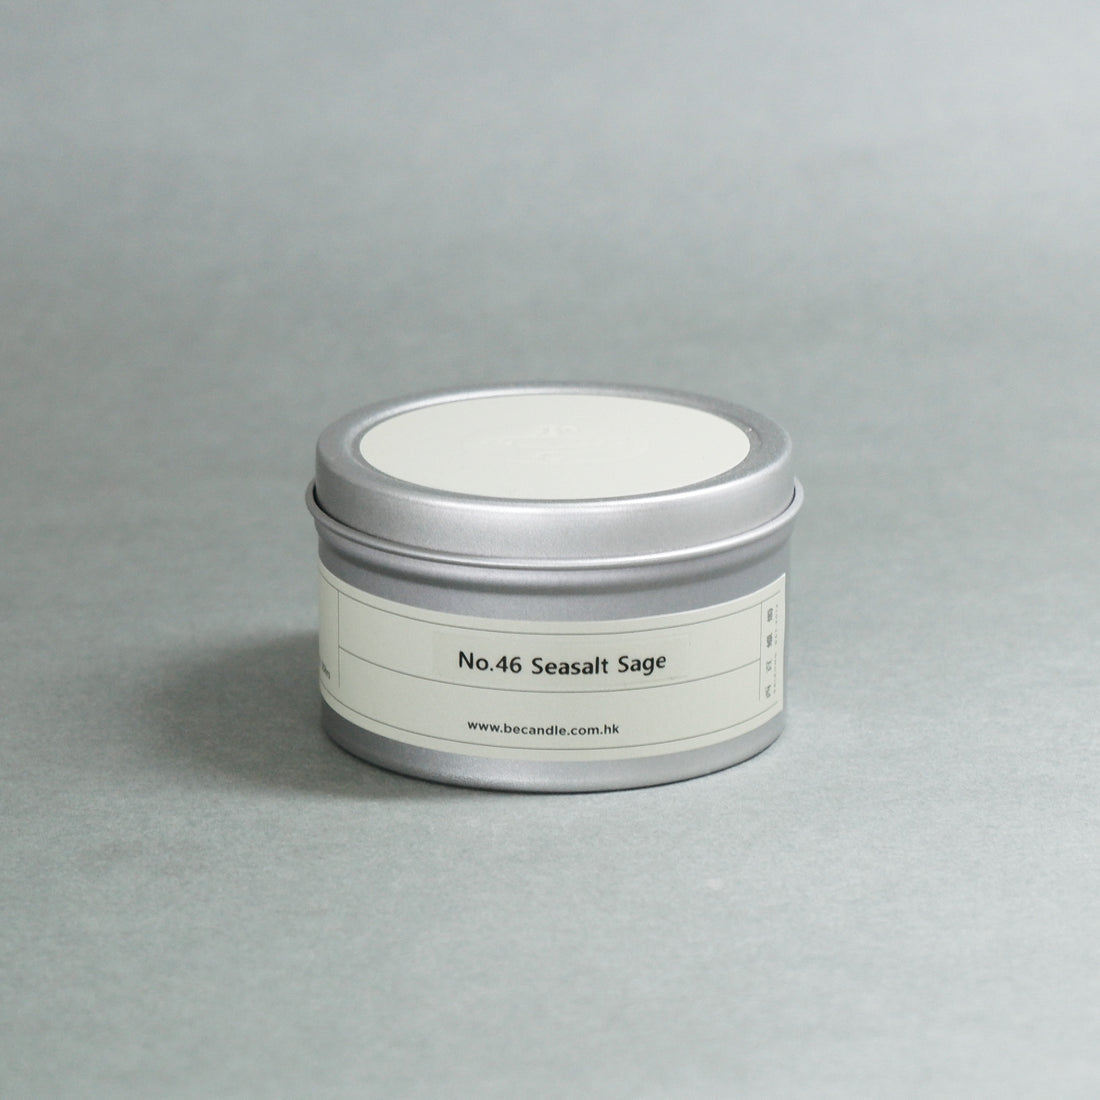 becandle_travel_candle_tin_can_80g_46_seasalt_sage_scented_candle_made_in_saikung